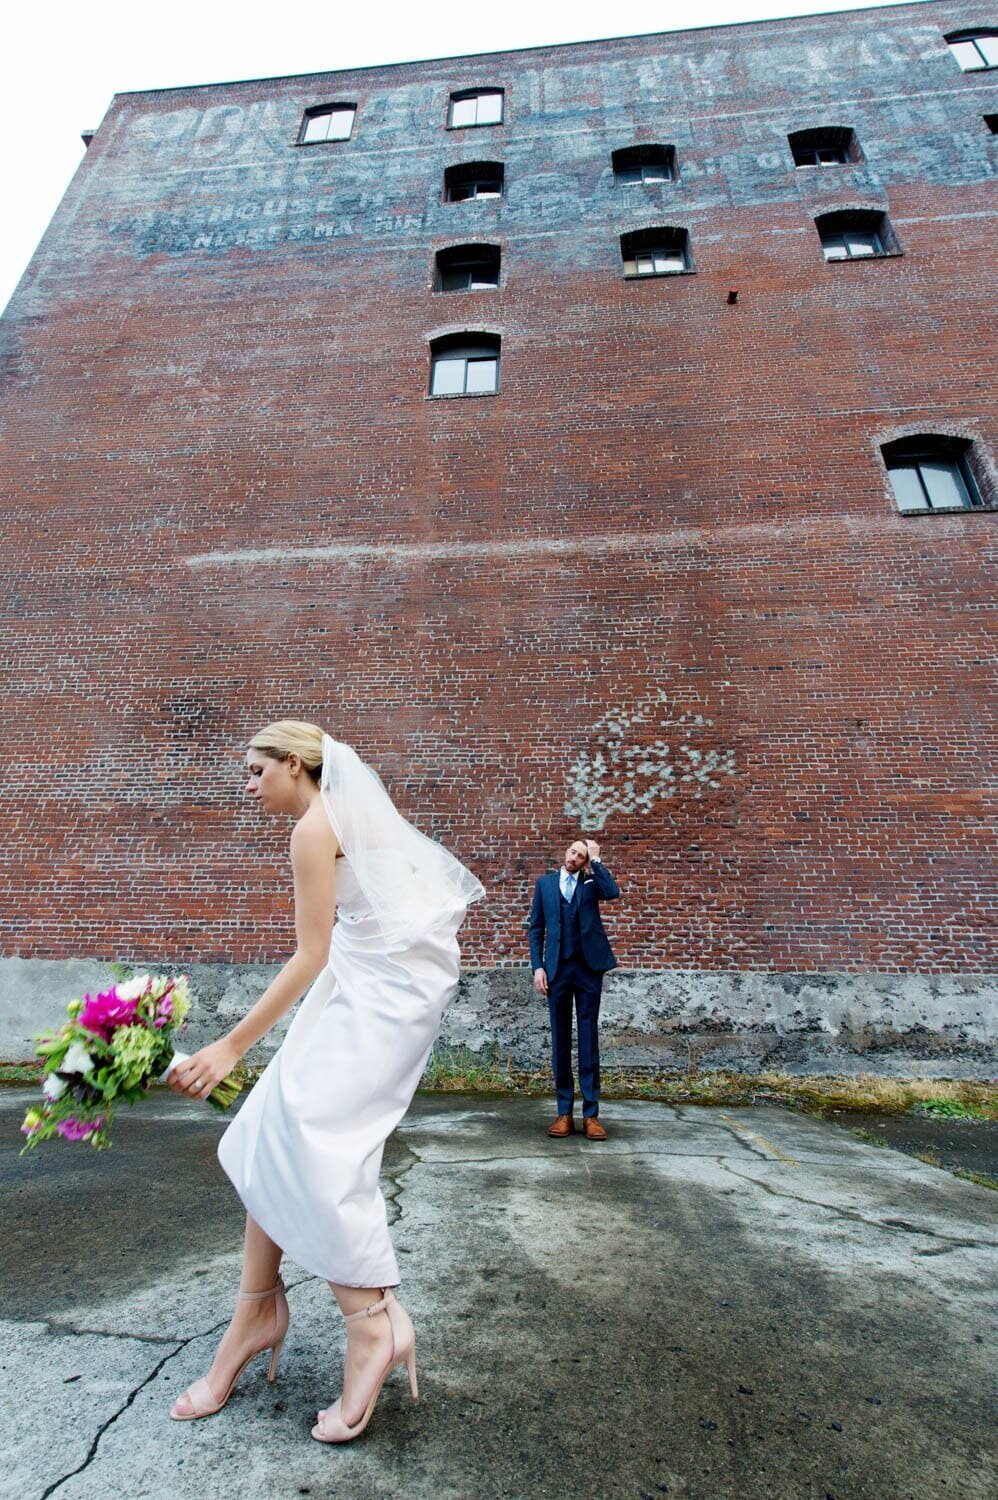 a bride puts her bouquet down as a groom waits for her in front of a tall brick building in nw portland